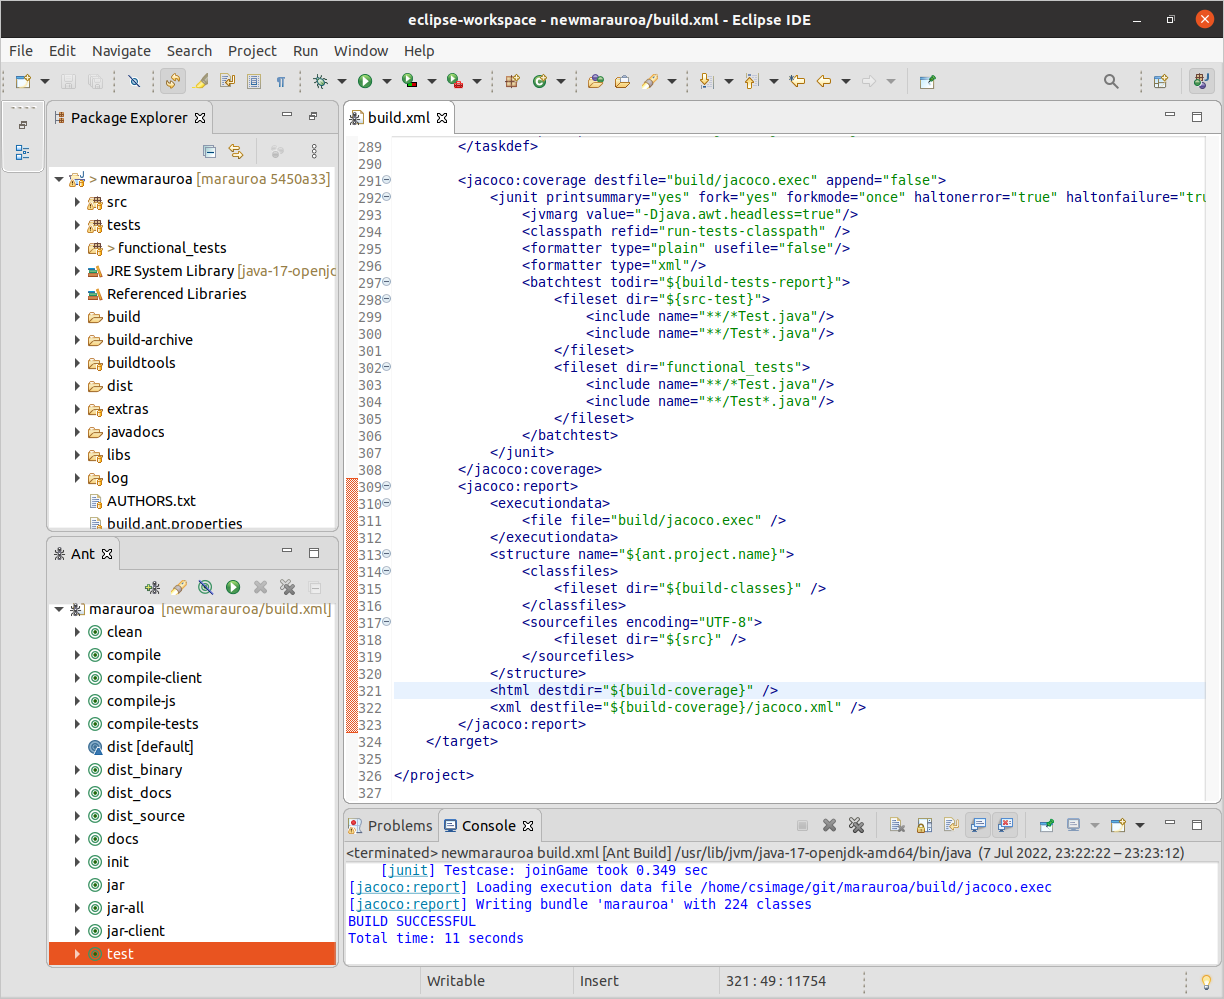 The JUnit view